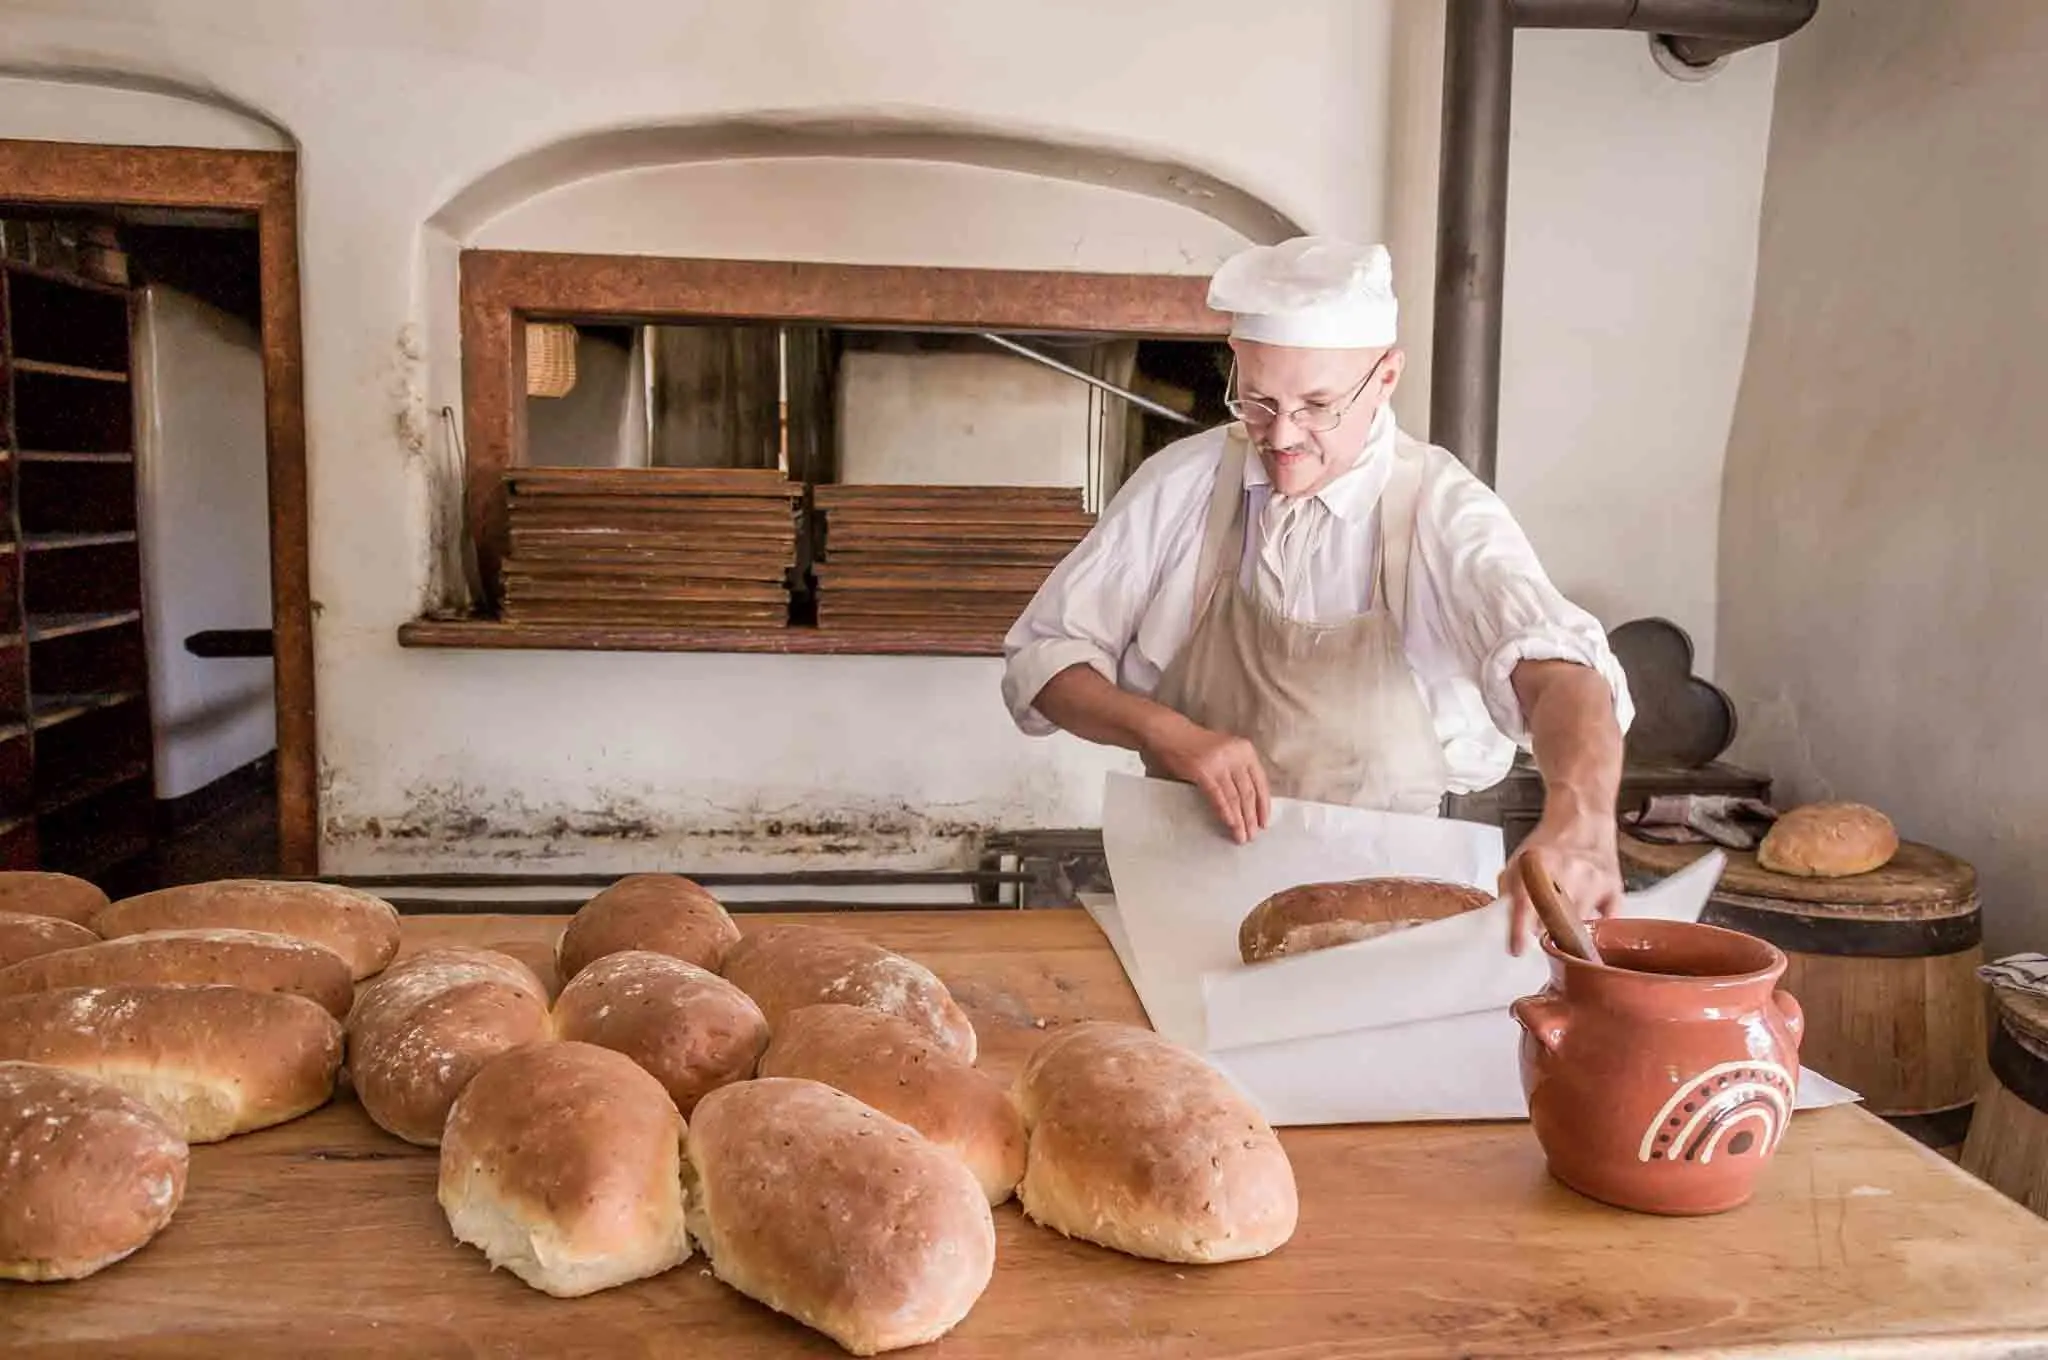 Baker buttering and wrapping bread at Old Salem.